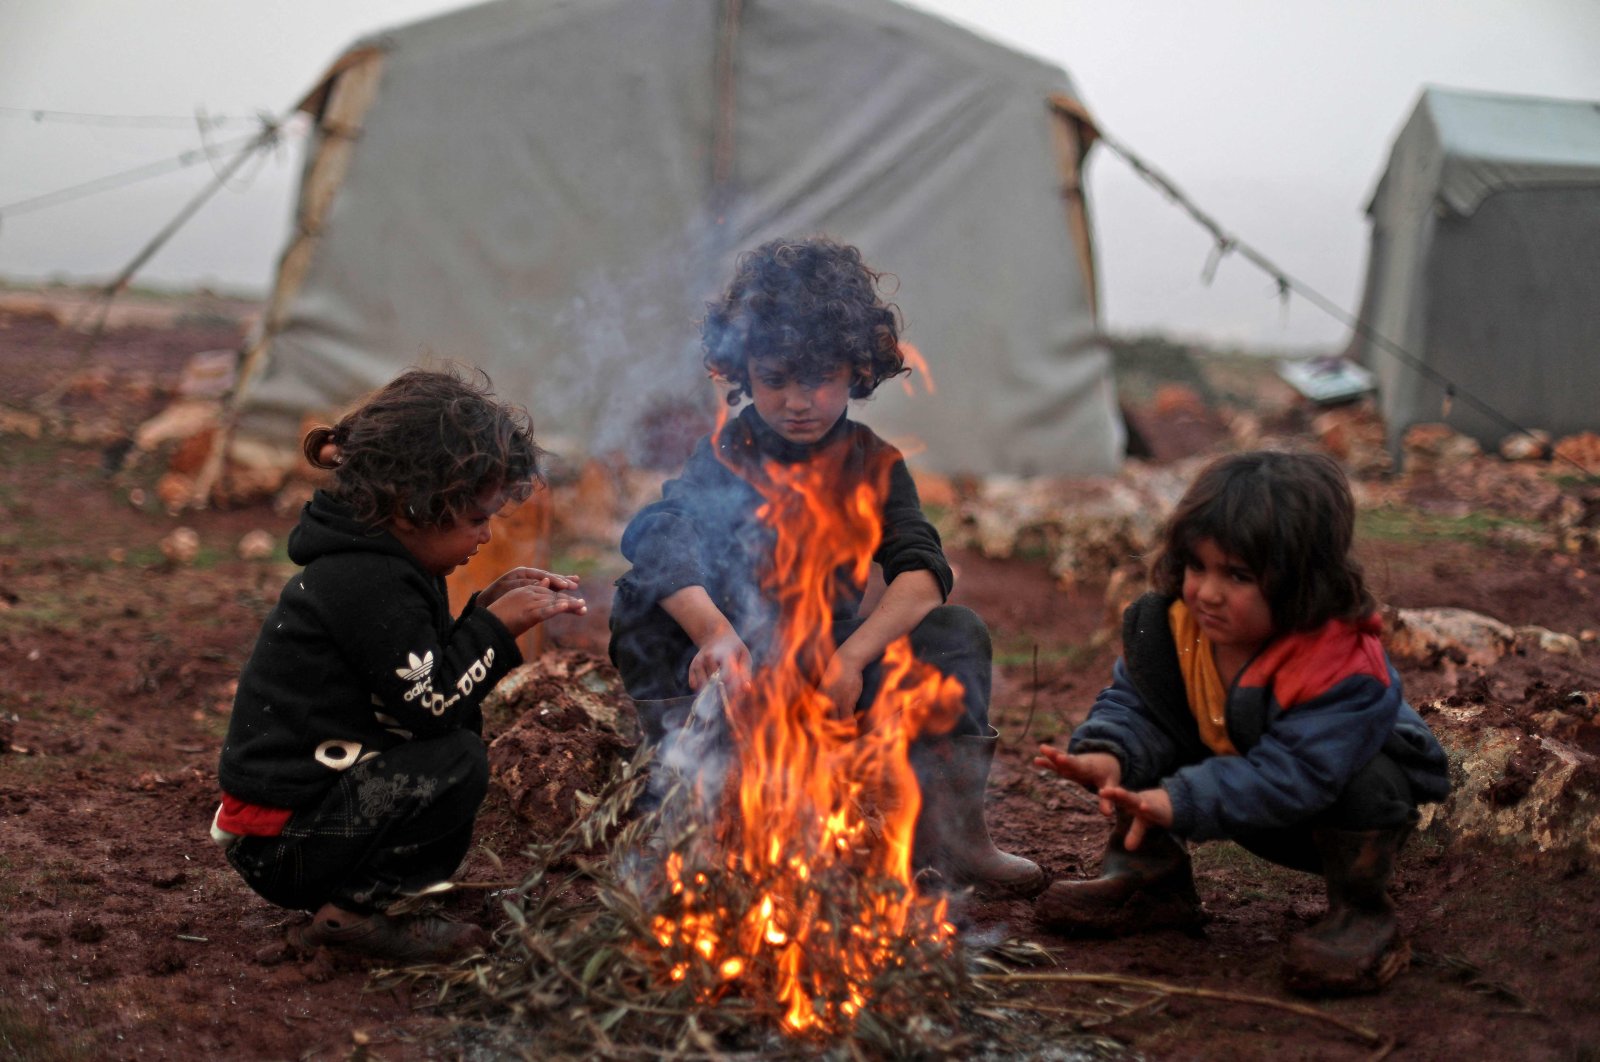 Children warm by the fire in a camp for displaced Syrians near the village of Kafr Uruq, in Syria&#039;s Idlib province, Dec. 17, 2021. (AFP Photo)